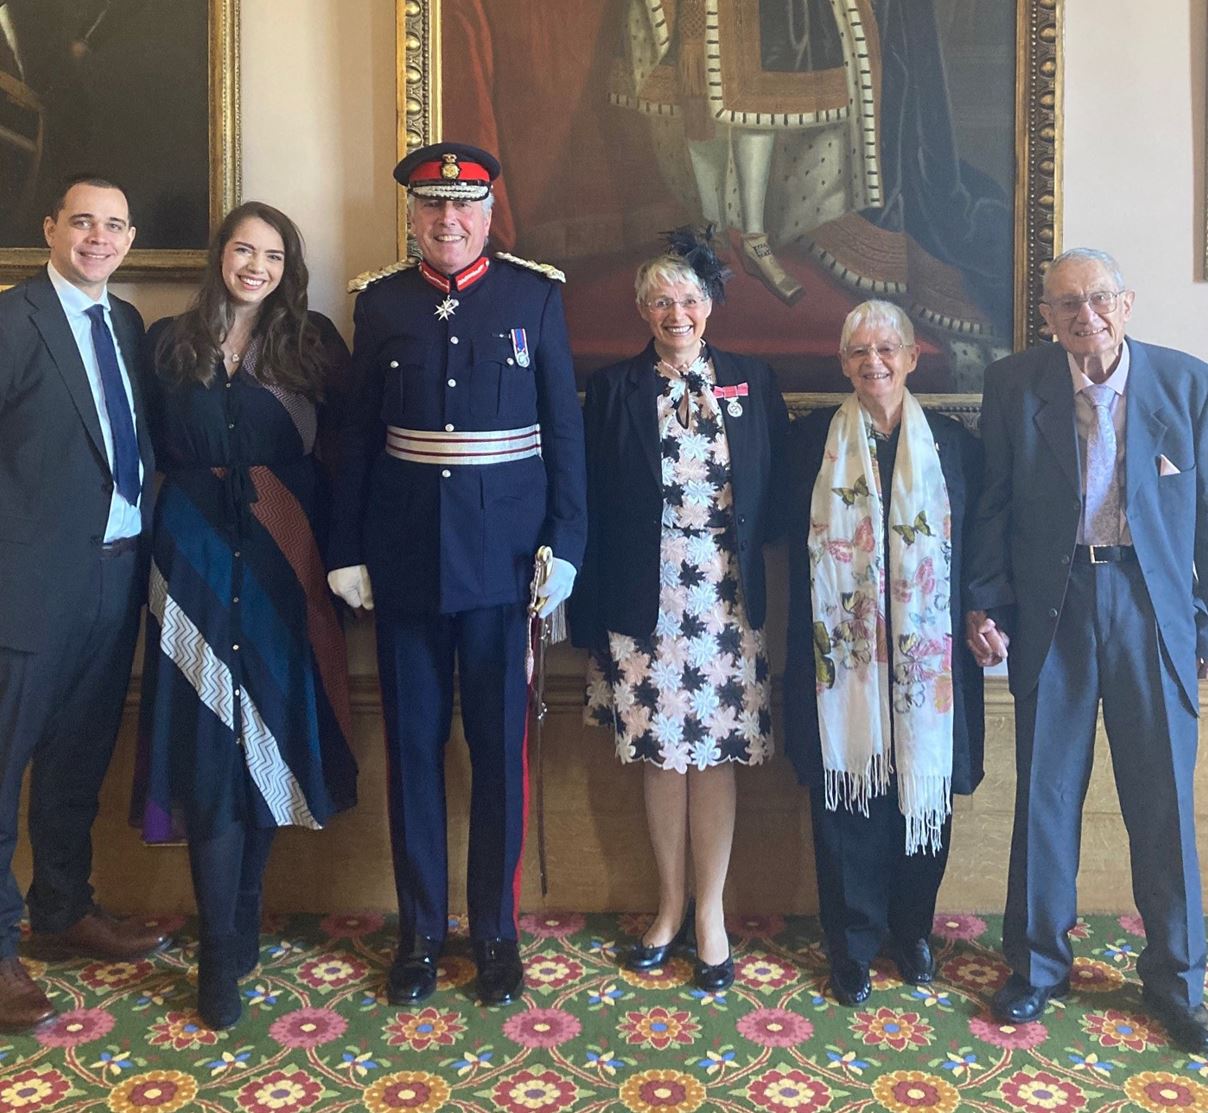 Sorrelle Clements (fourth from left) wearing her British Empire medal next to Lord Lieutenant Tim Cox alongside family and friends.